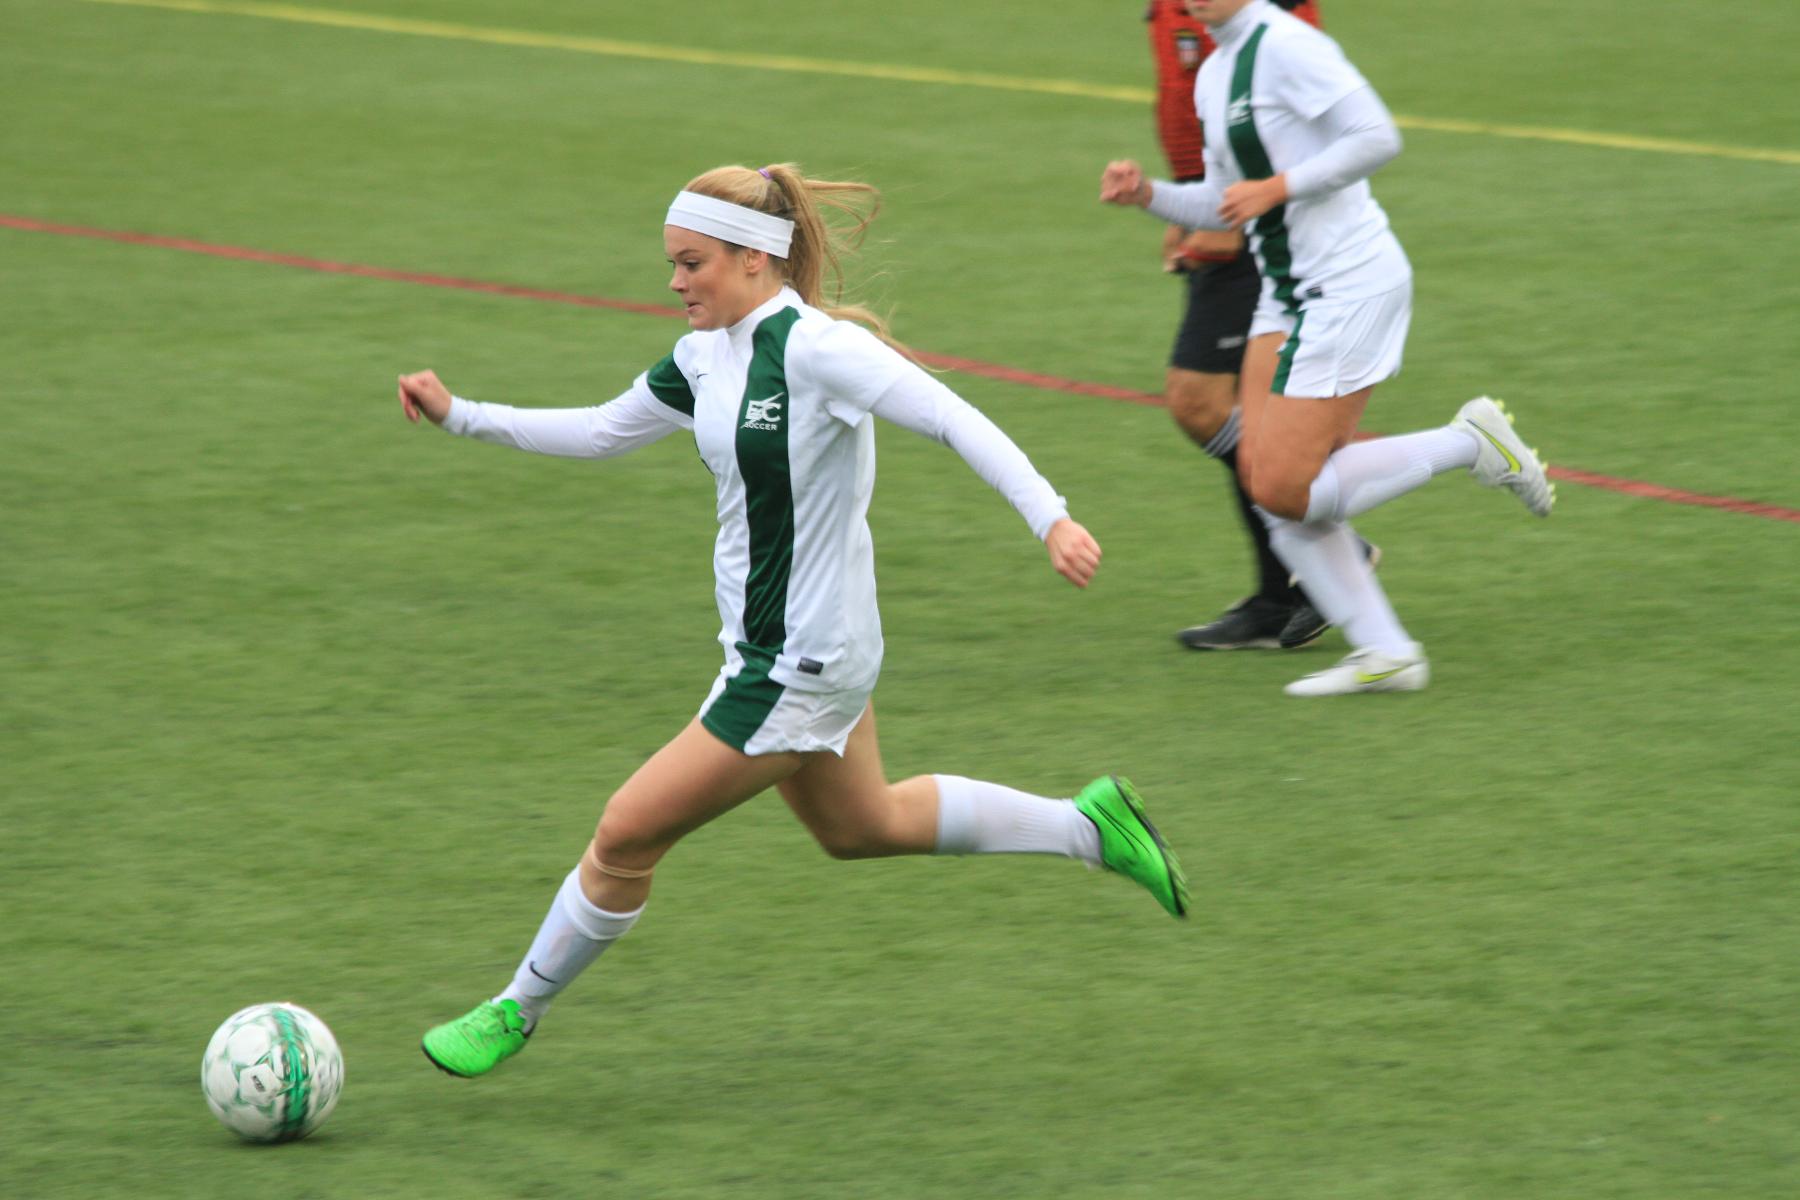 Women's Soccer Completes Undefeated Conference Season With Win at Daniel Webster